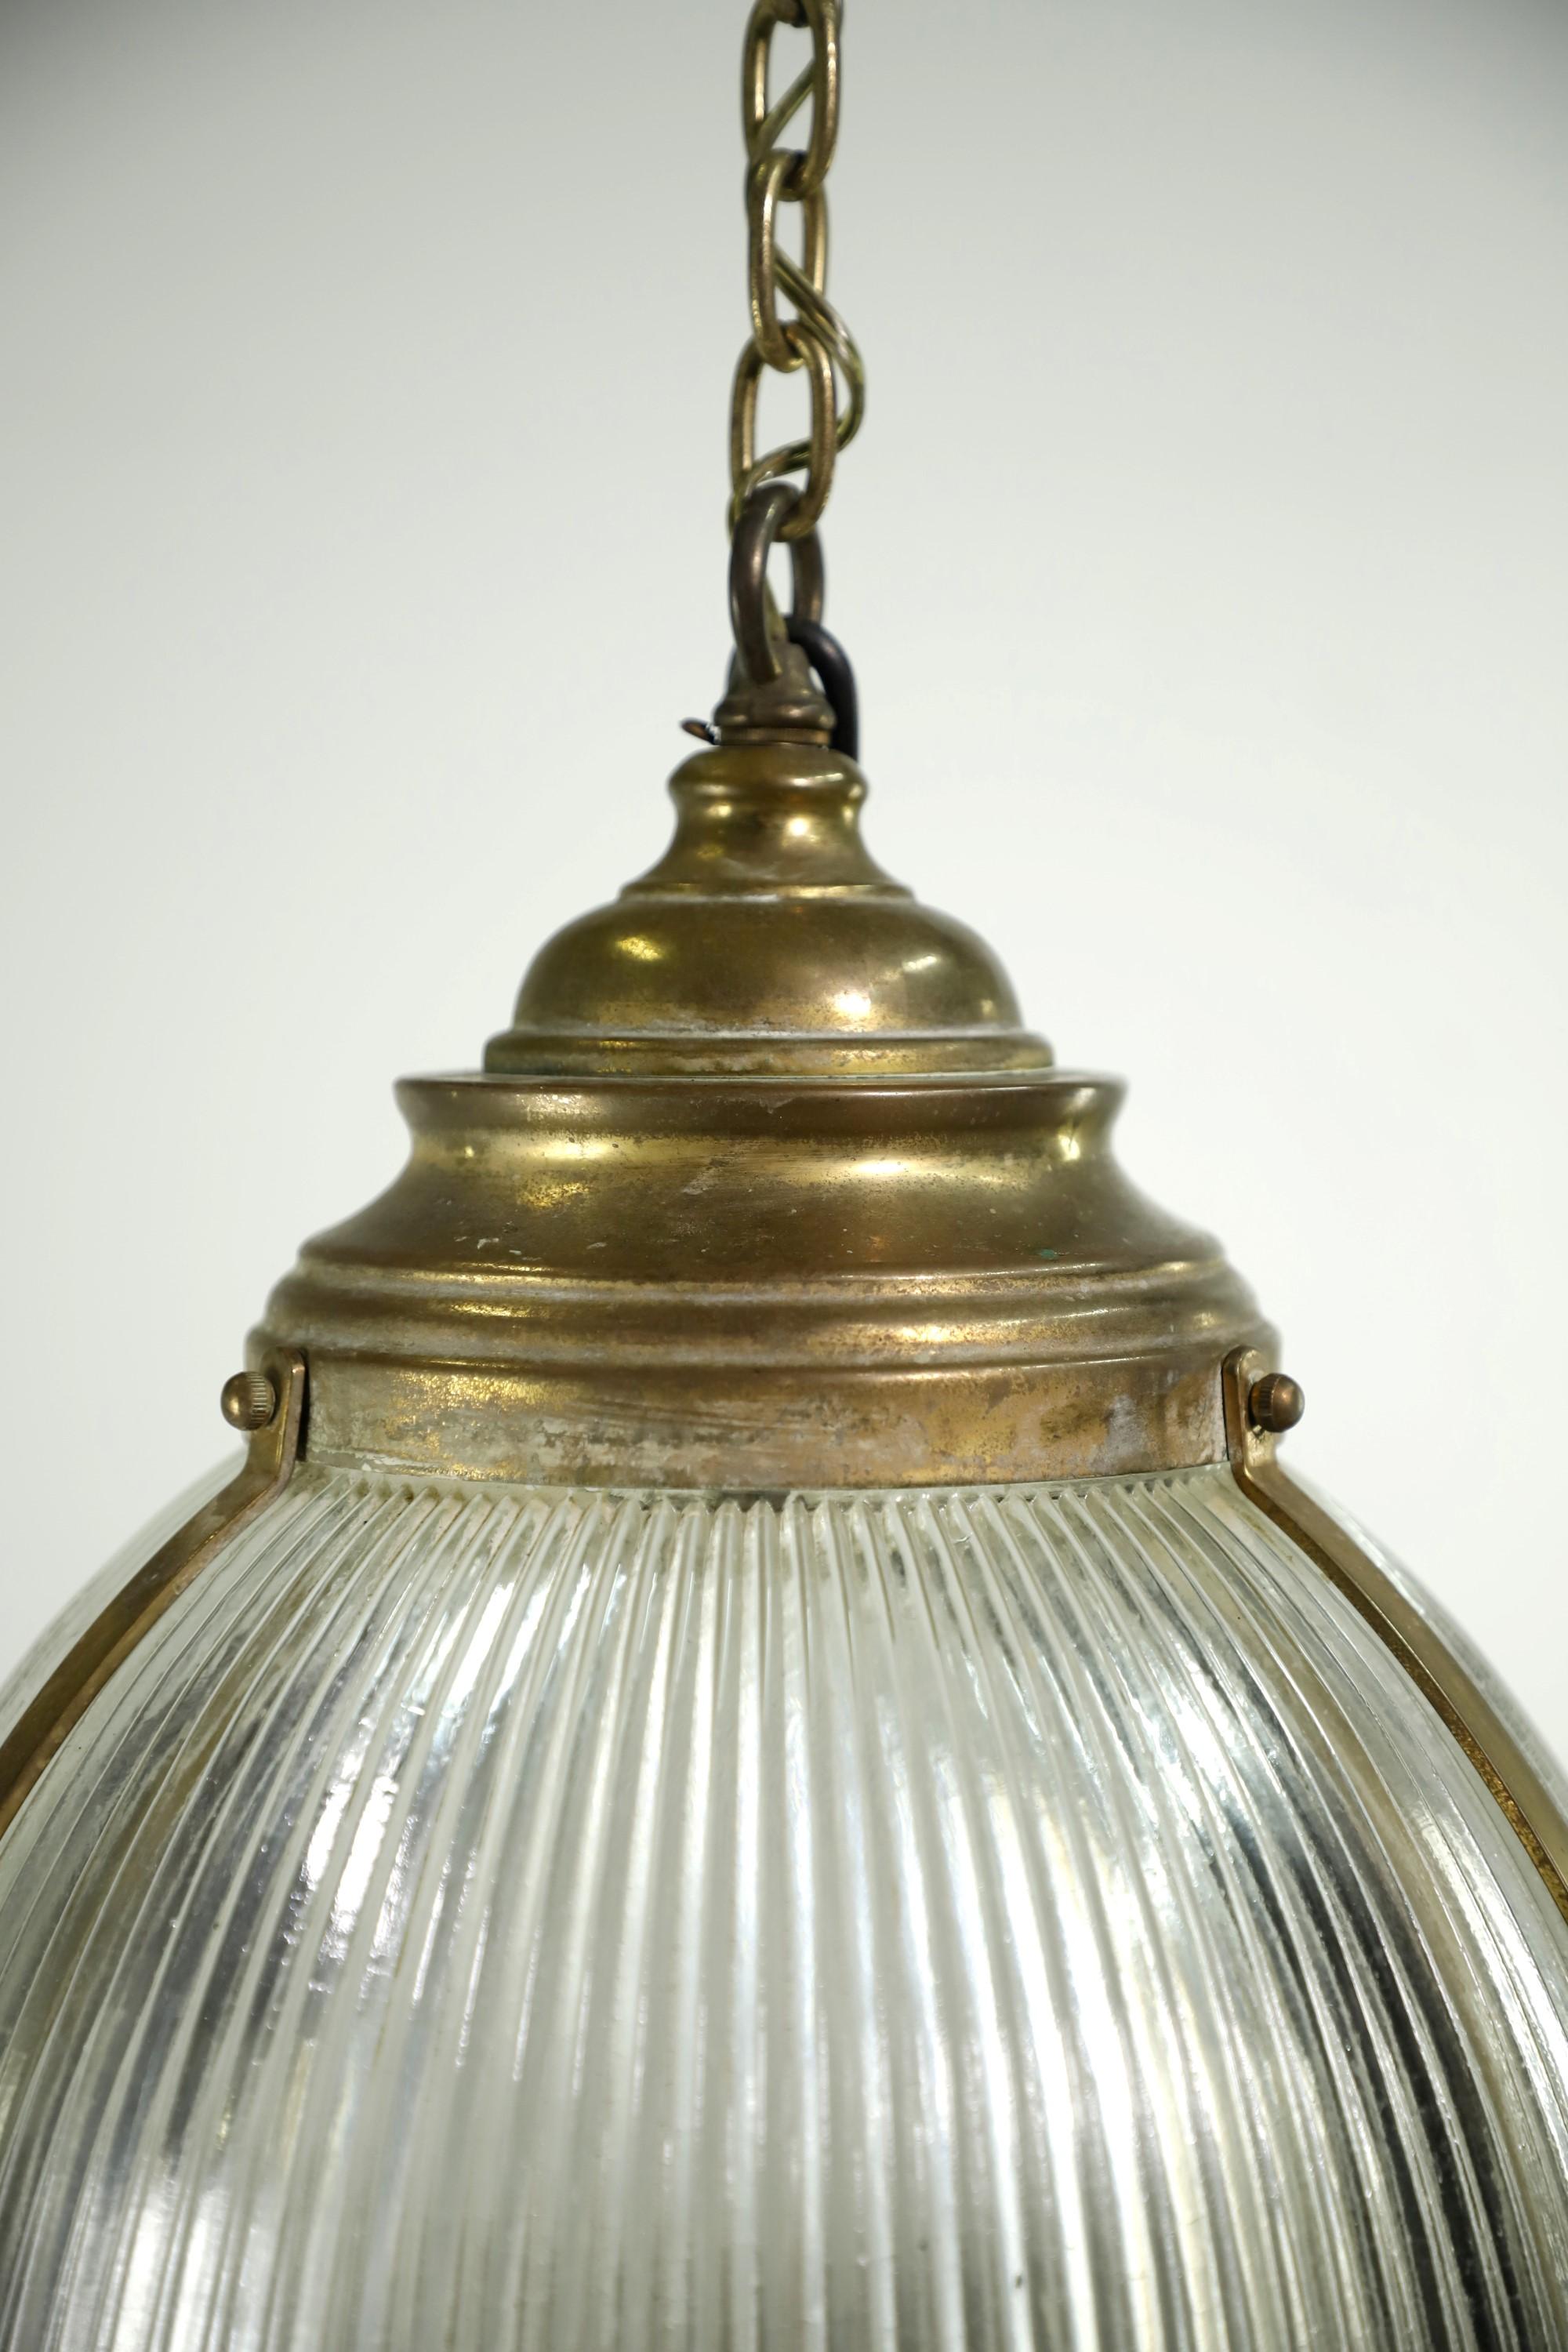 20th Century Holophane pendant light done in a brass finish. Shade features the classic ribbing pattern to spread out the light evenly. Takes one medium base light bulb. Cleaned and restored. Please note, this item is located in our Scranton, PA